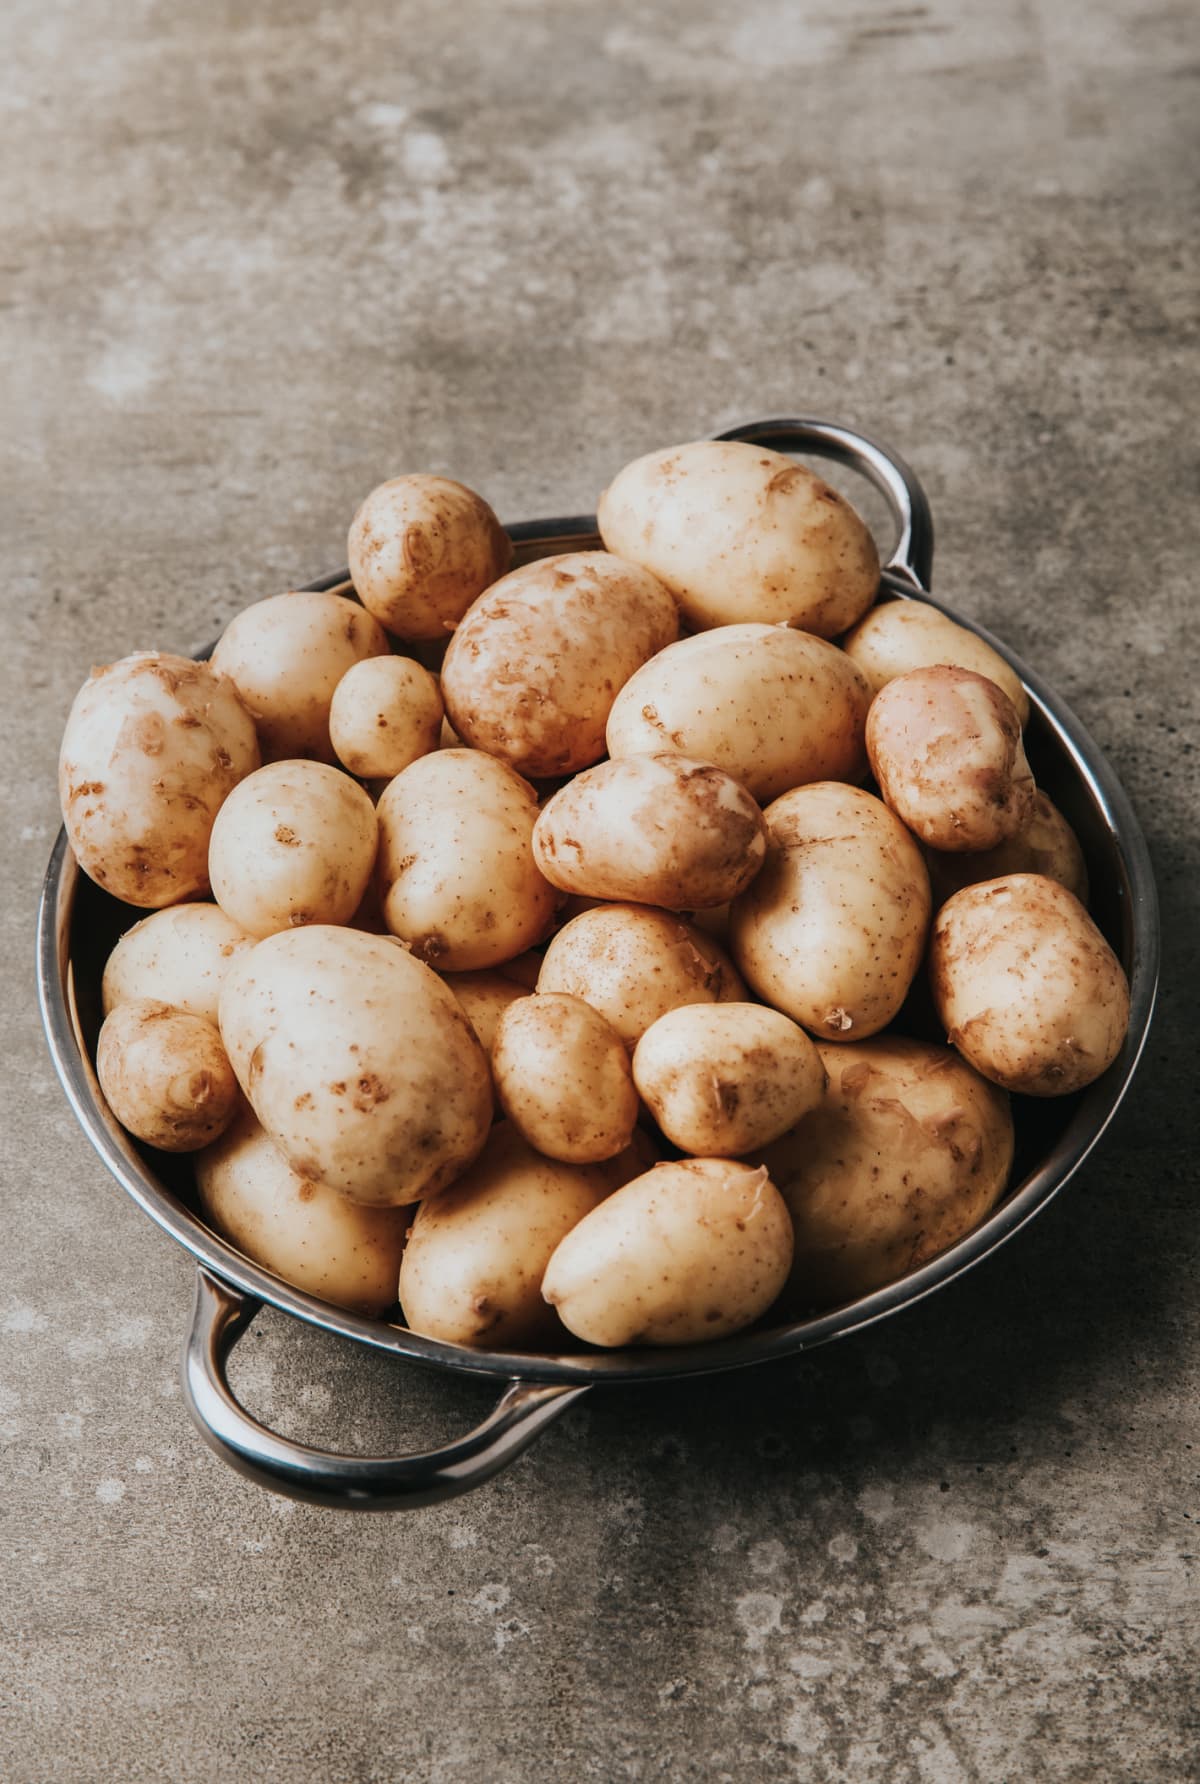 Raw potatoes in tray on a table